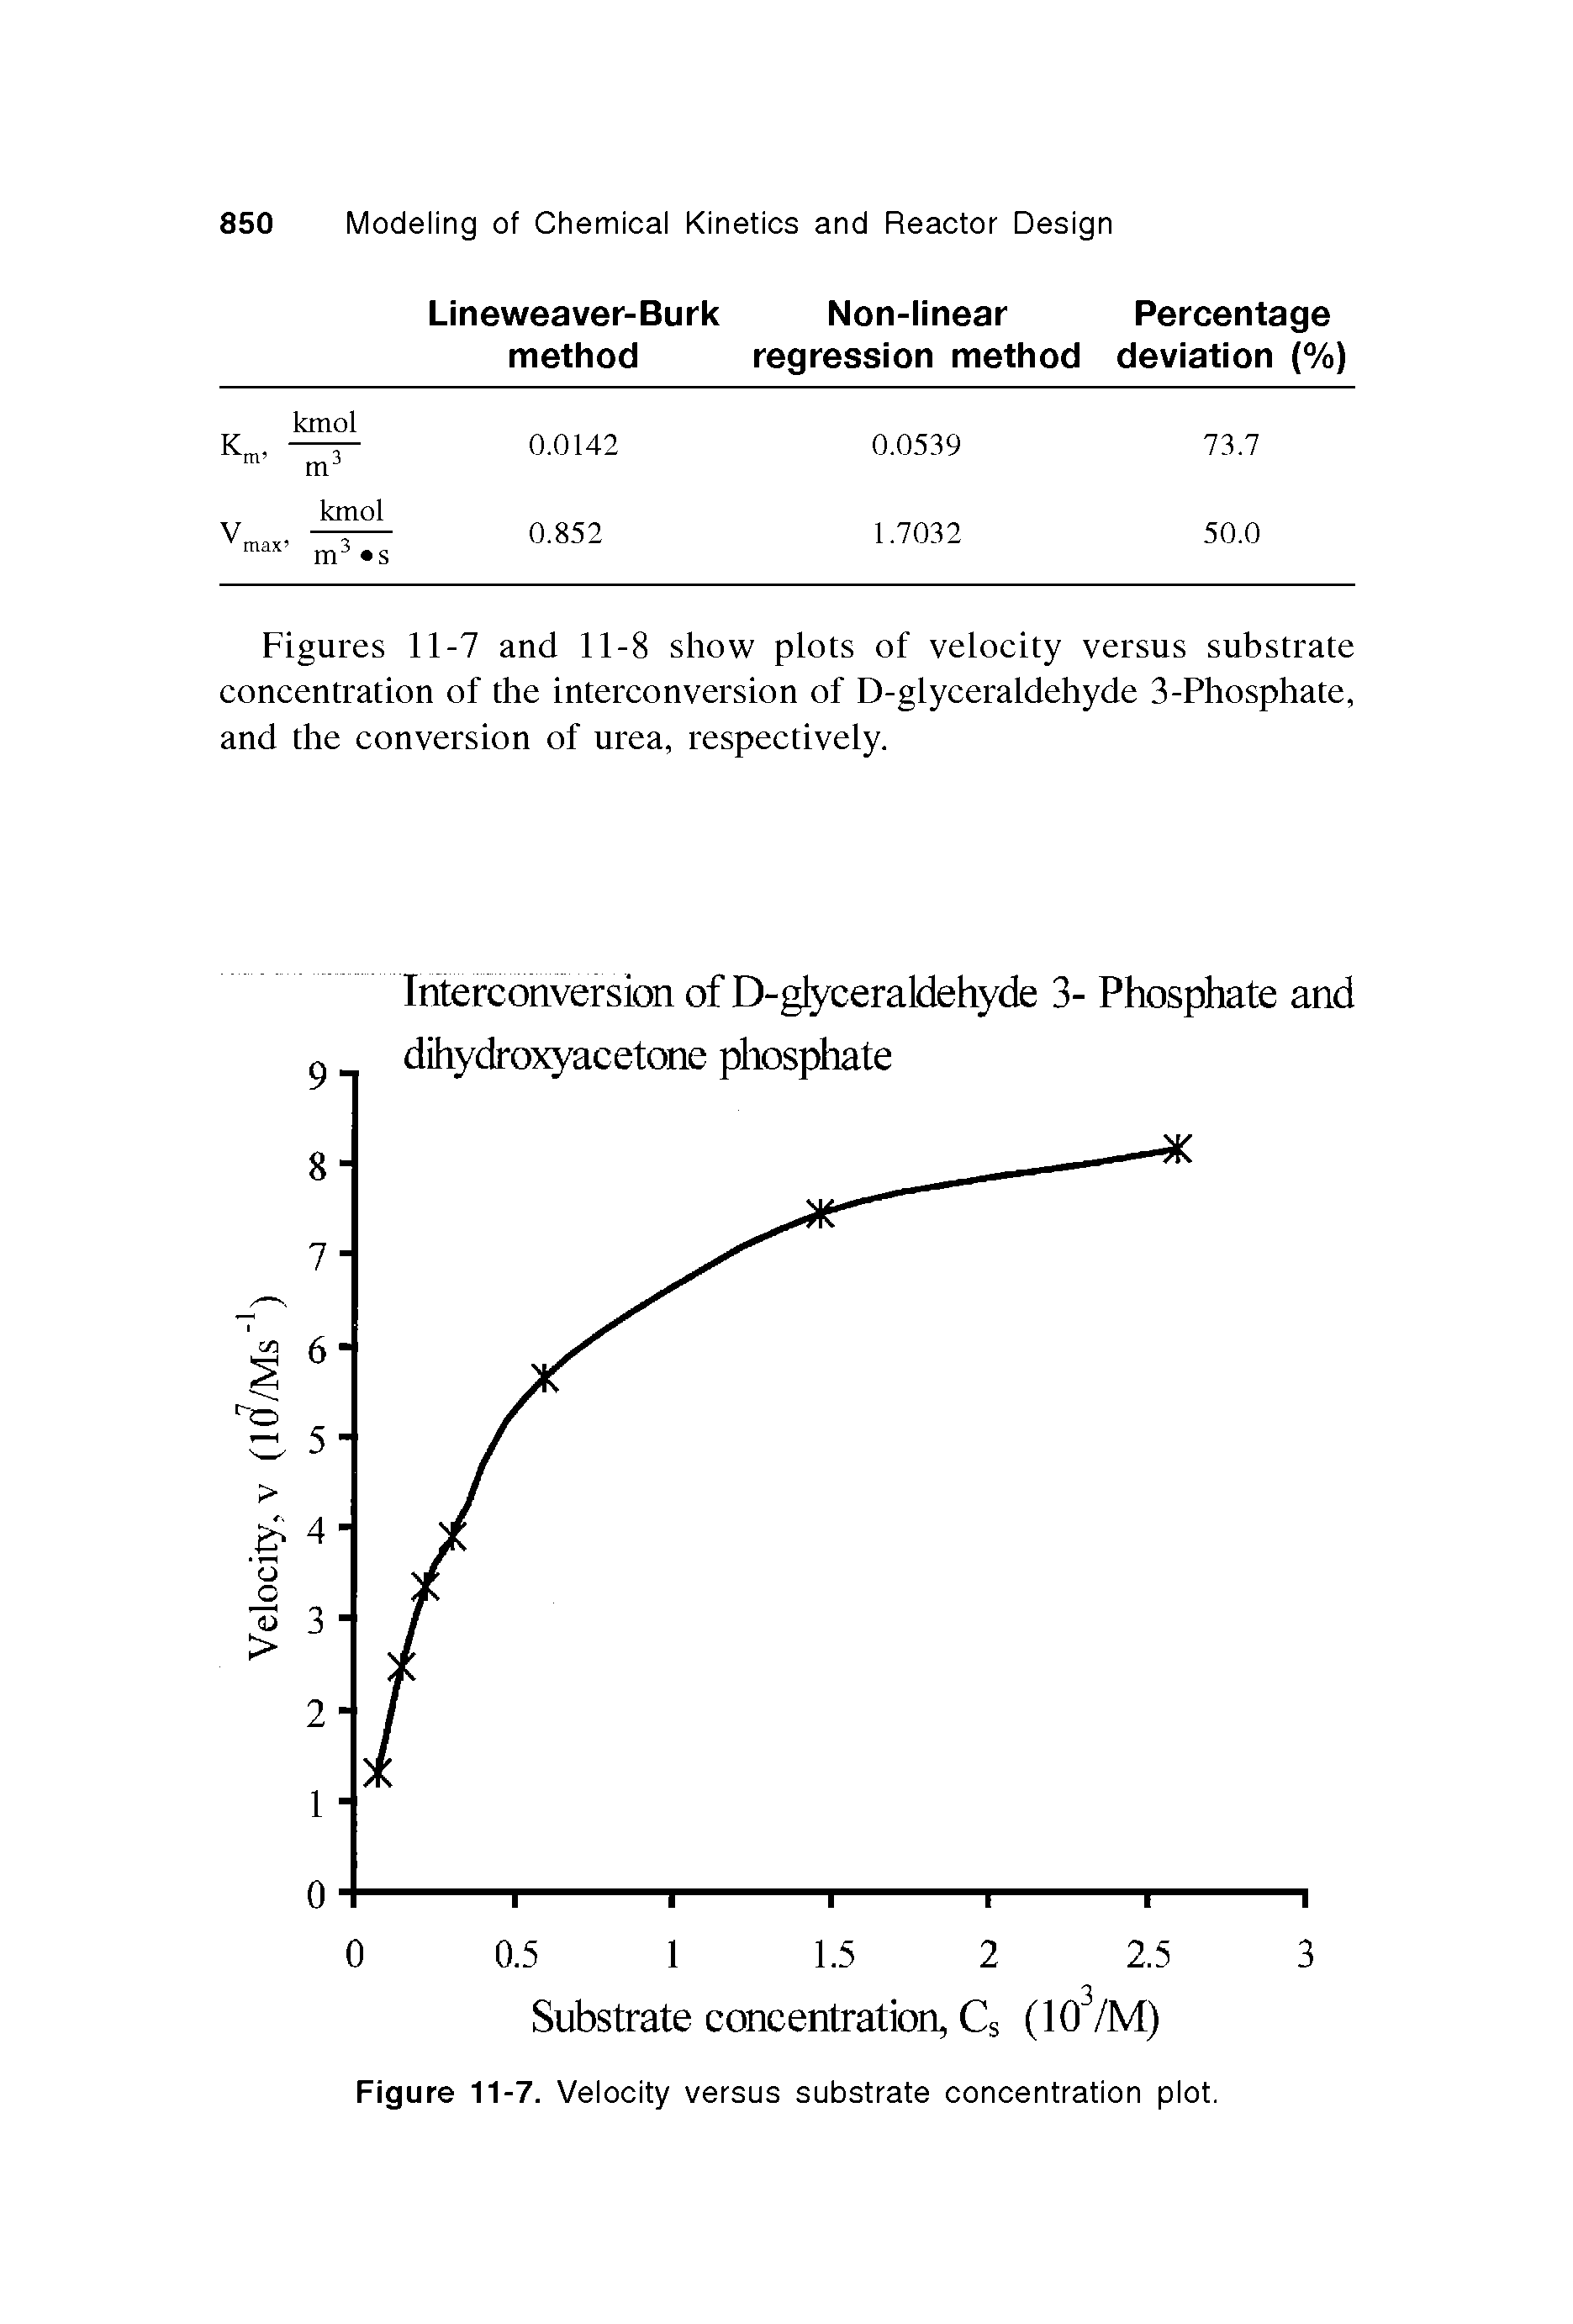 Figures 11-7 and 11-8 show plots of velocity versus substrate concentration of the interconversion of D-glyceraldehyde 3-Phosphate, and the conversion of urea, respectively.